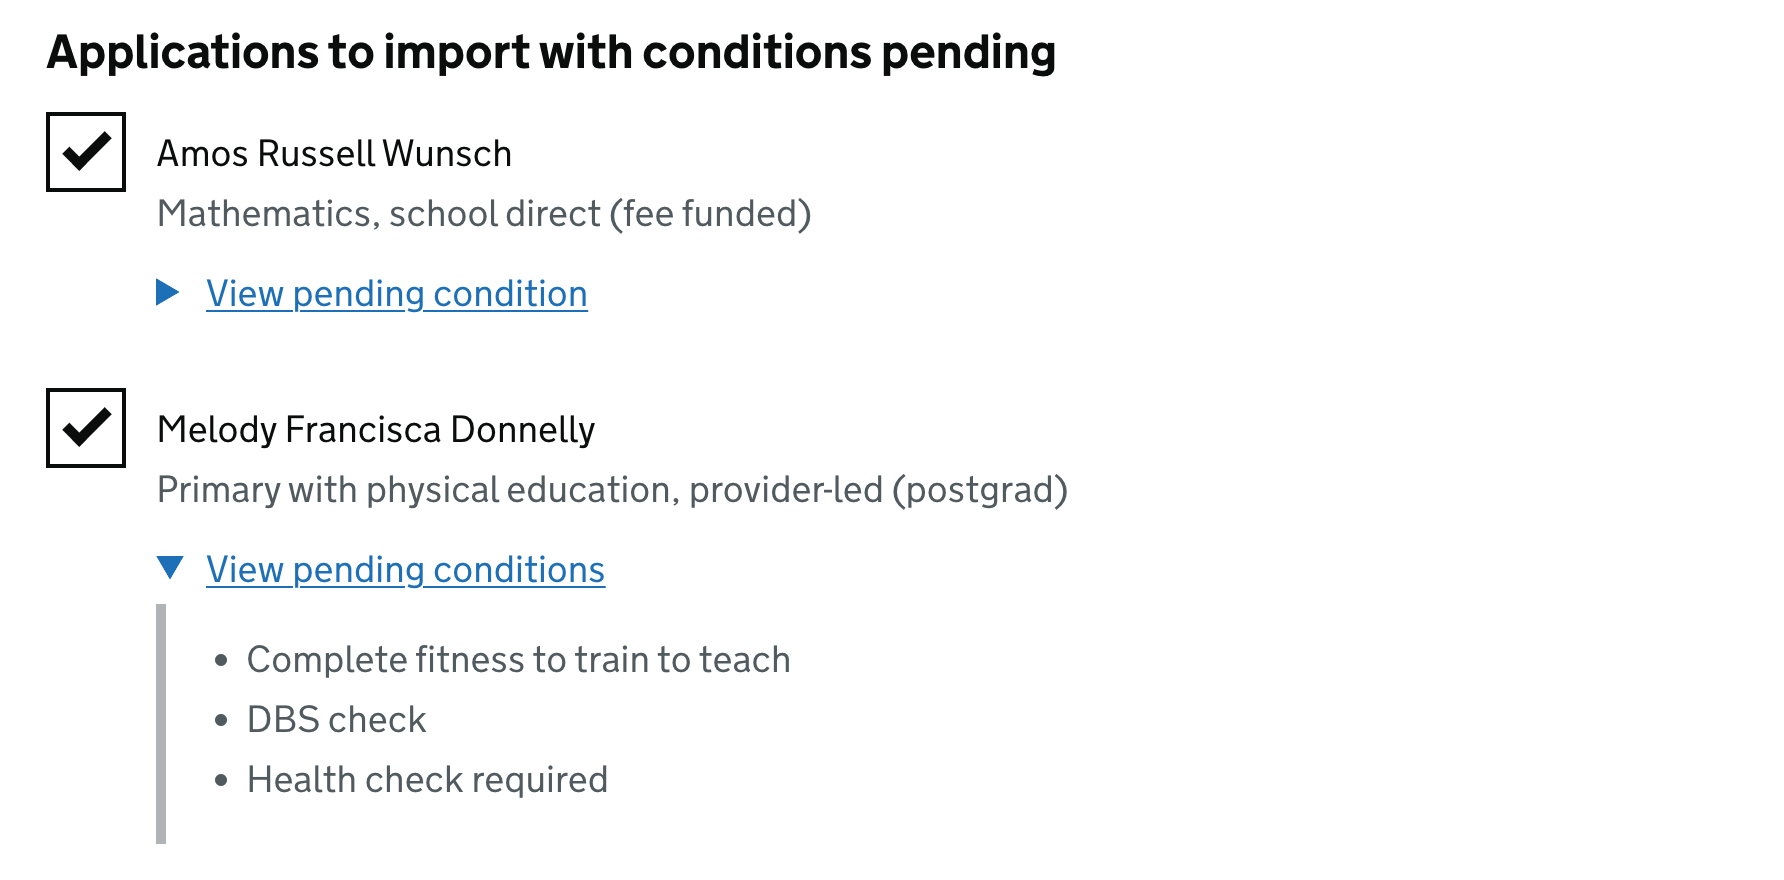 The checkboxes for 2 applications have been checked. The details component for one has been expanded, showing the pending conditions for that application.